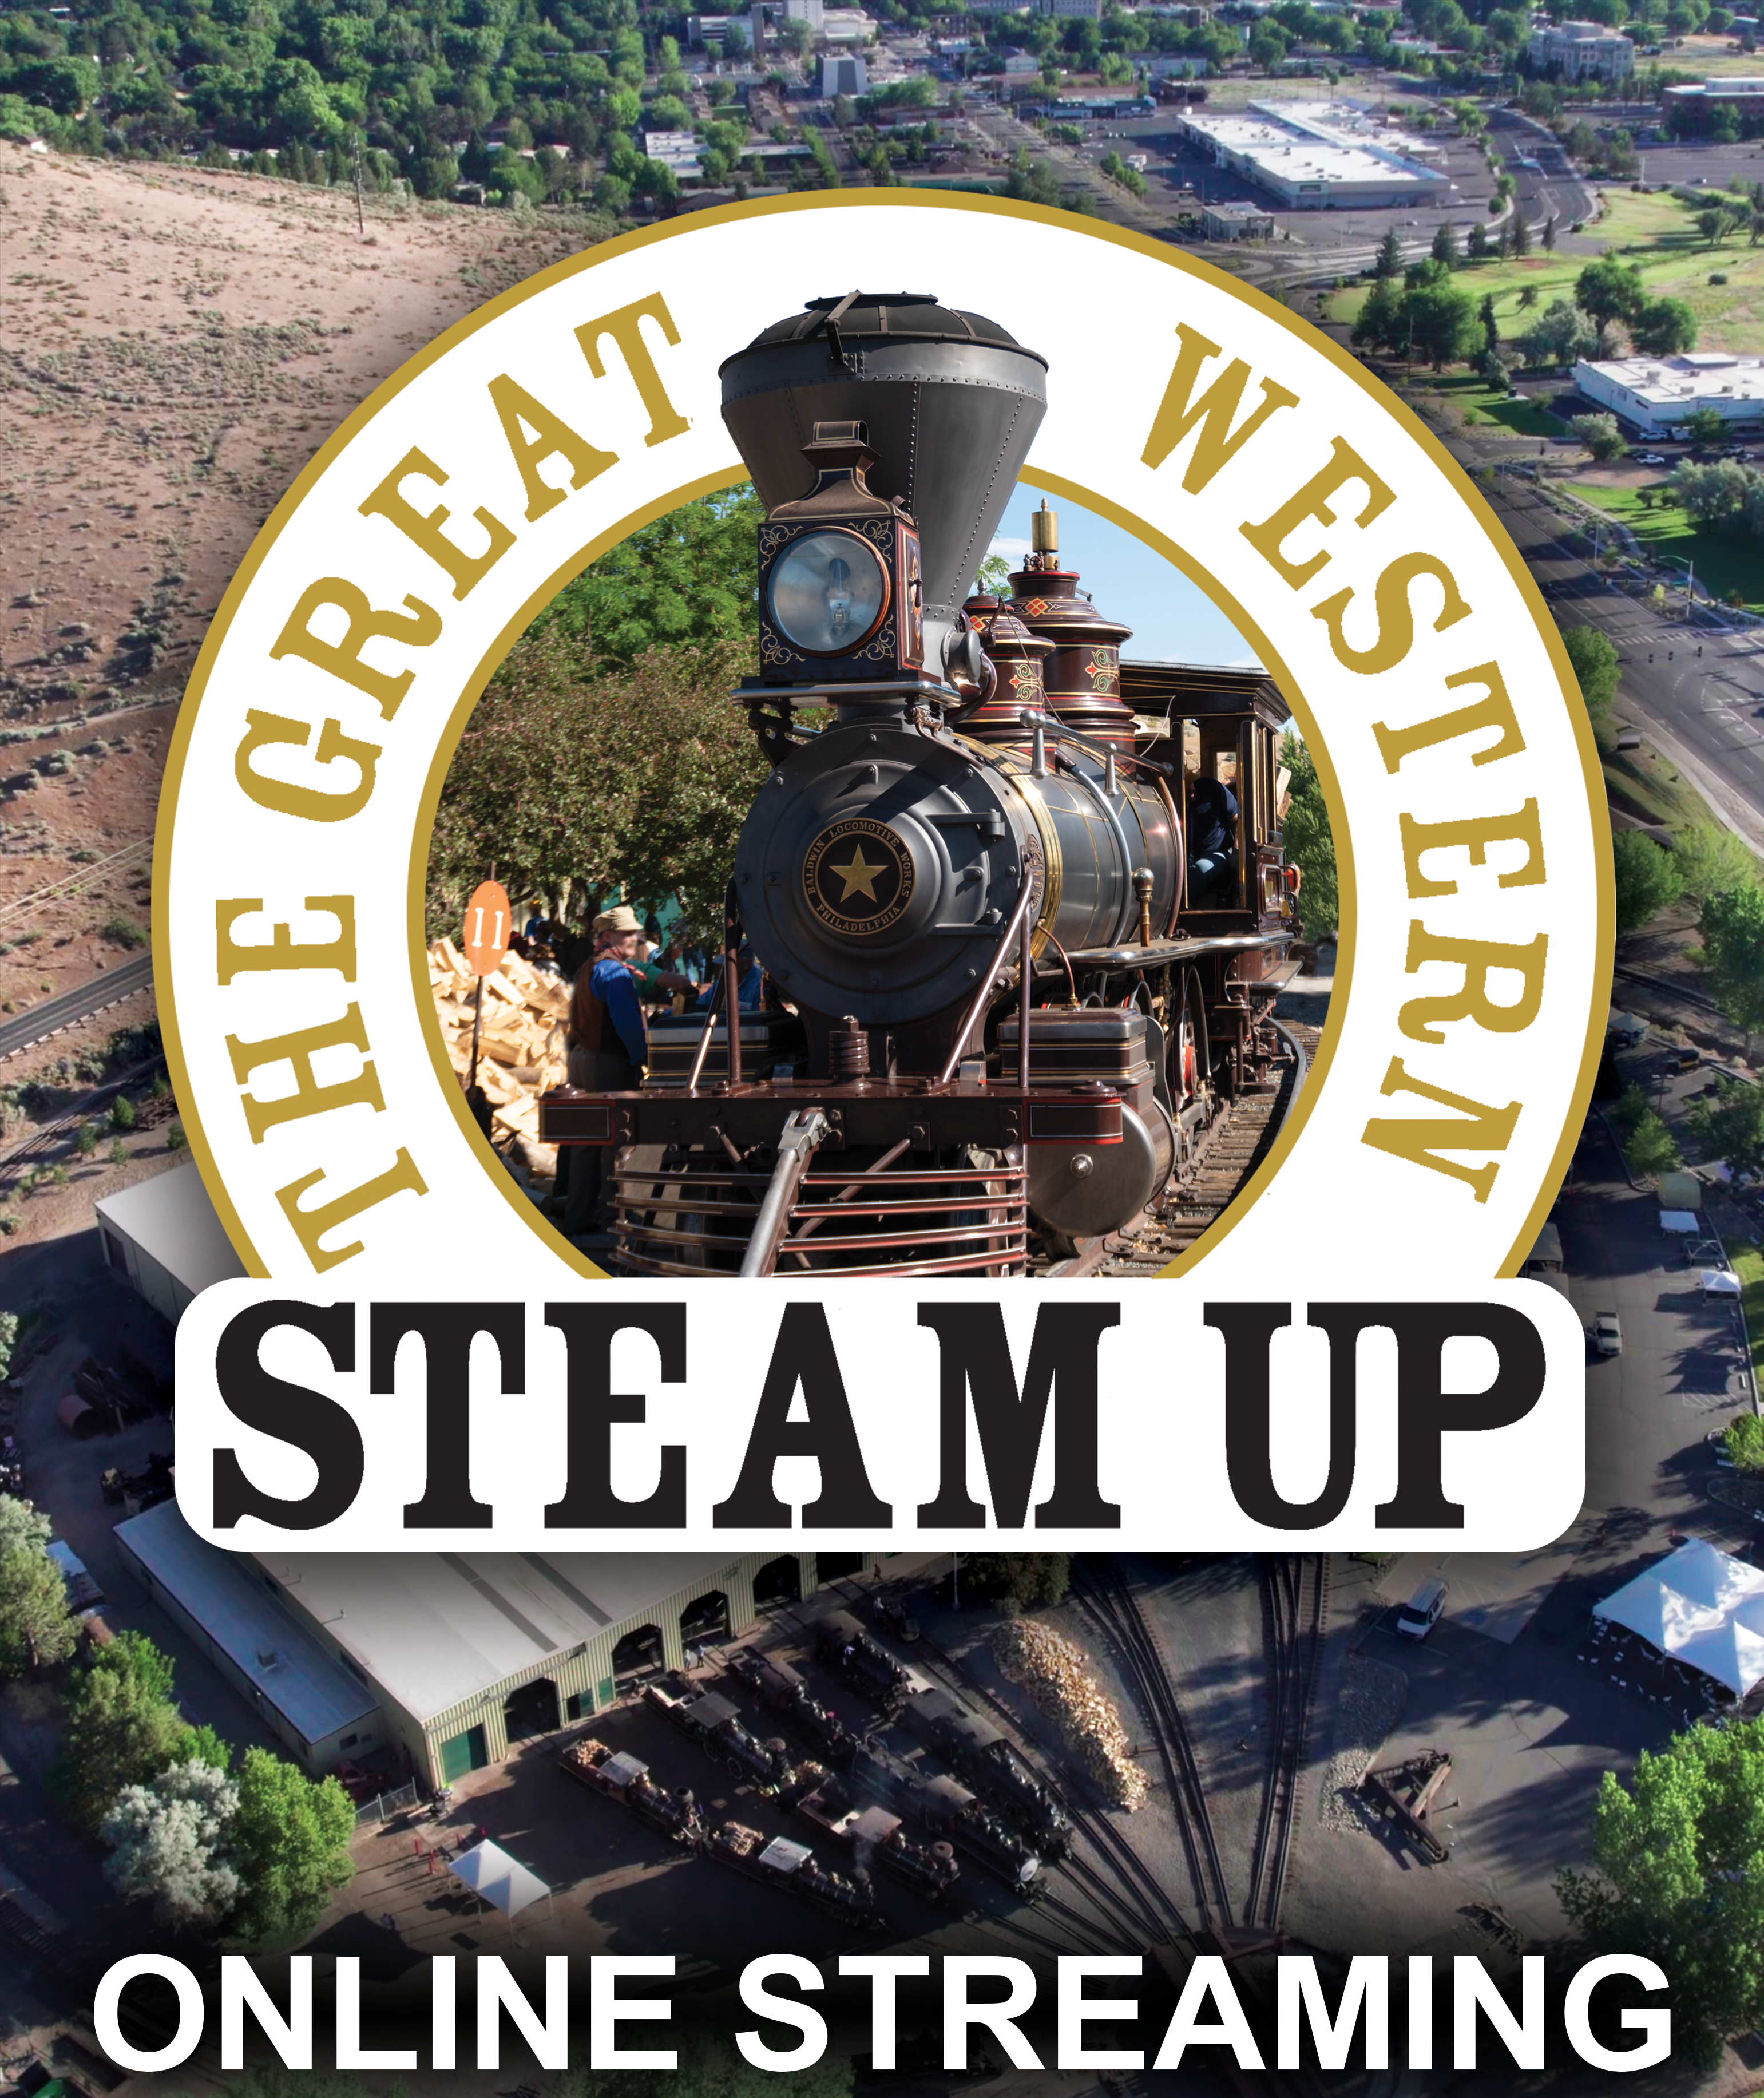 The Great Western Steam Up Streaming Cover